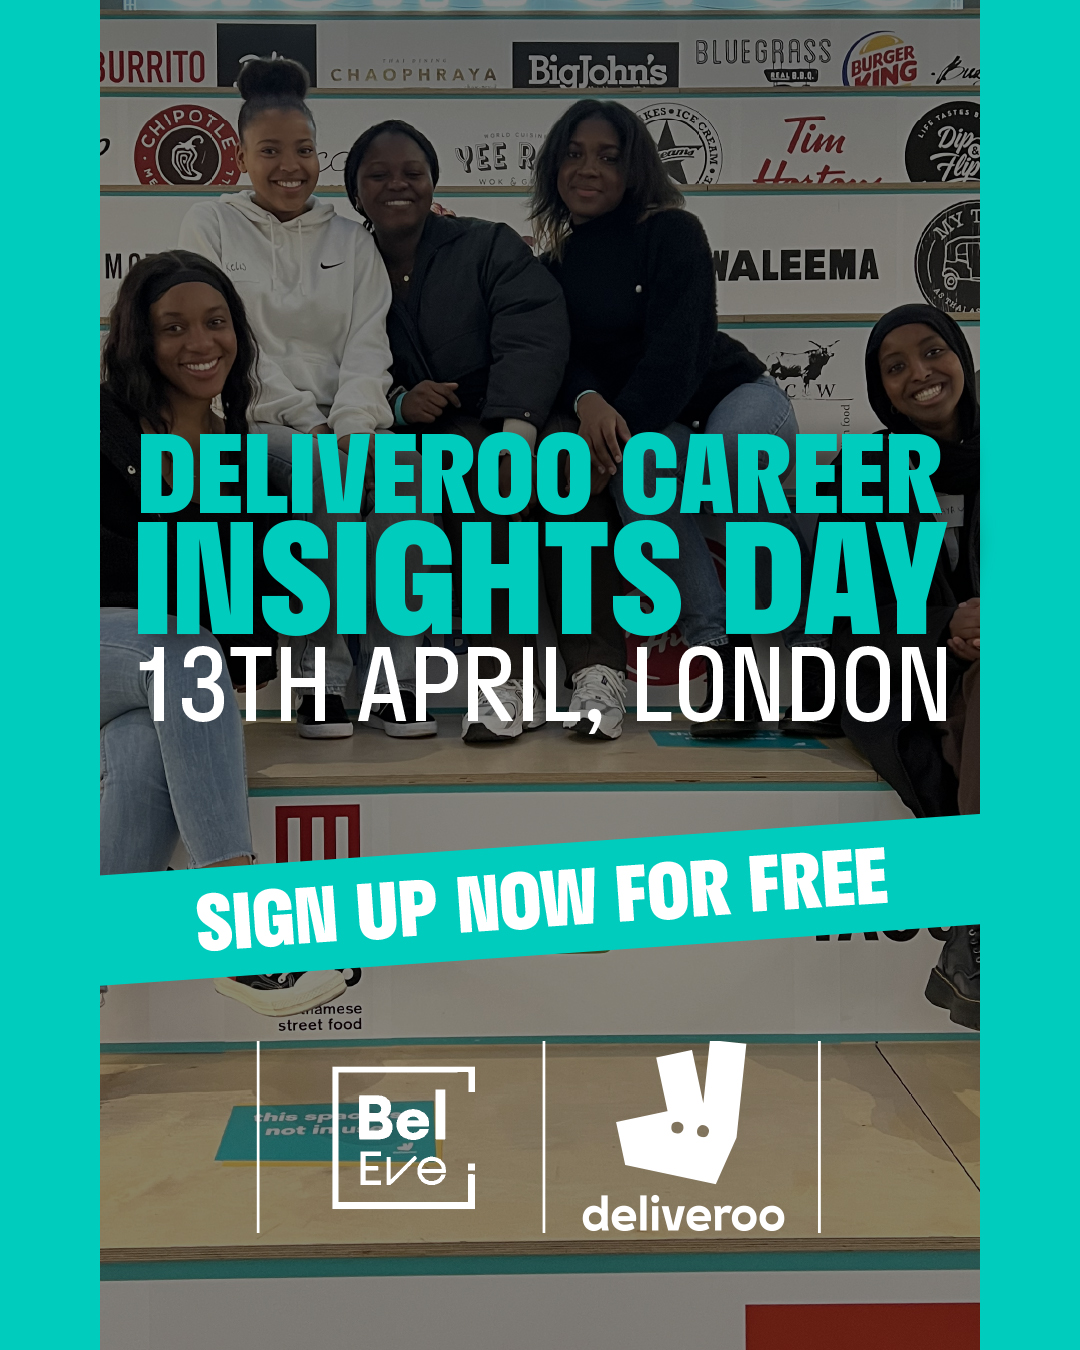 Free Deliveroo Career Insight Day